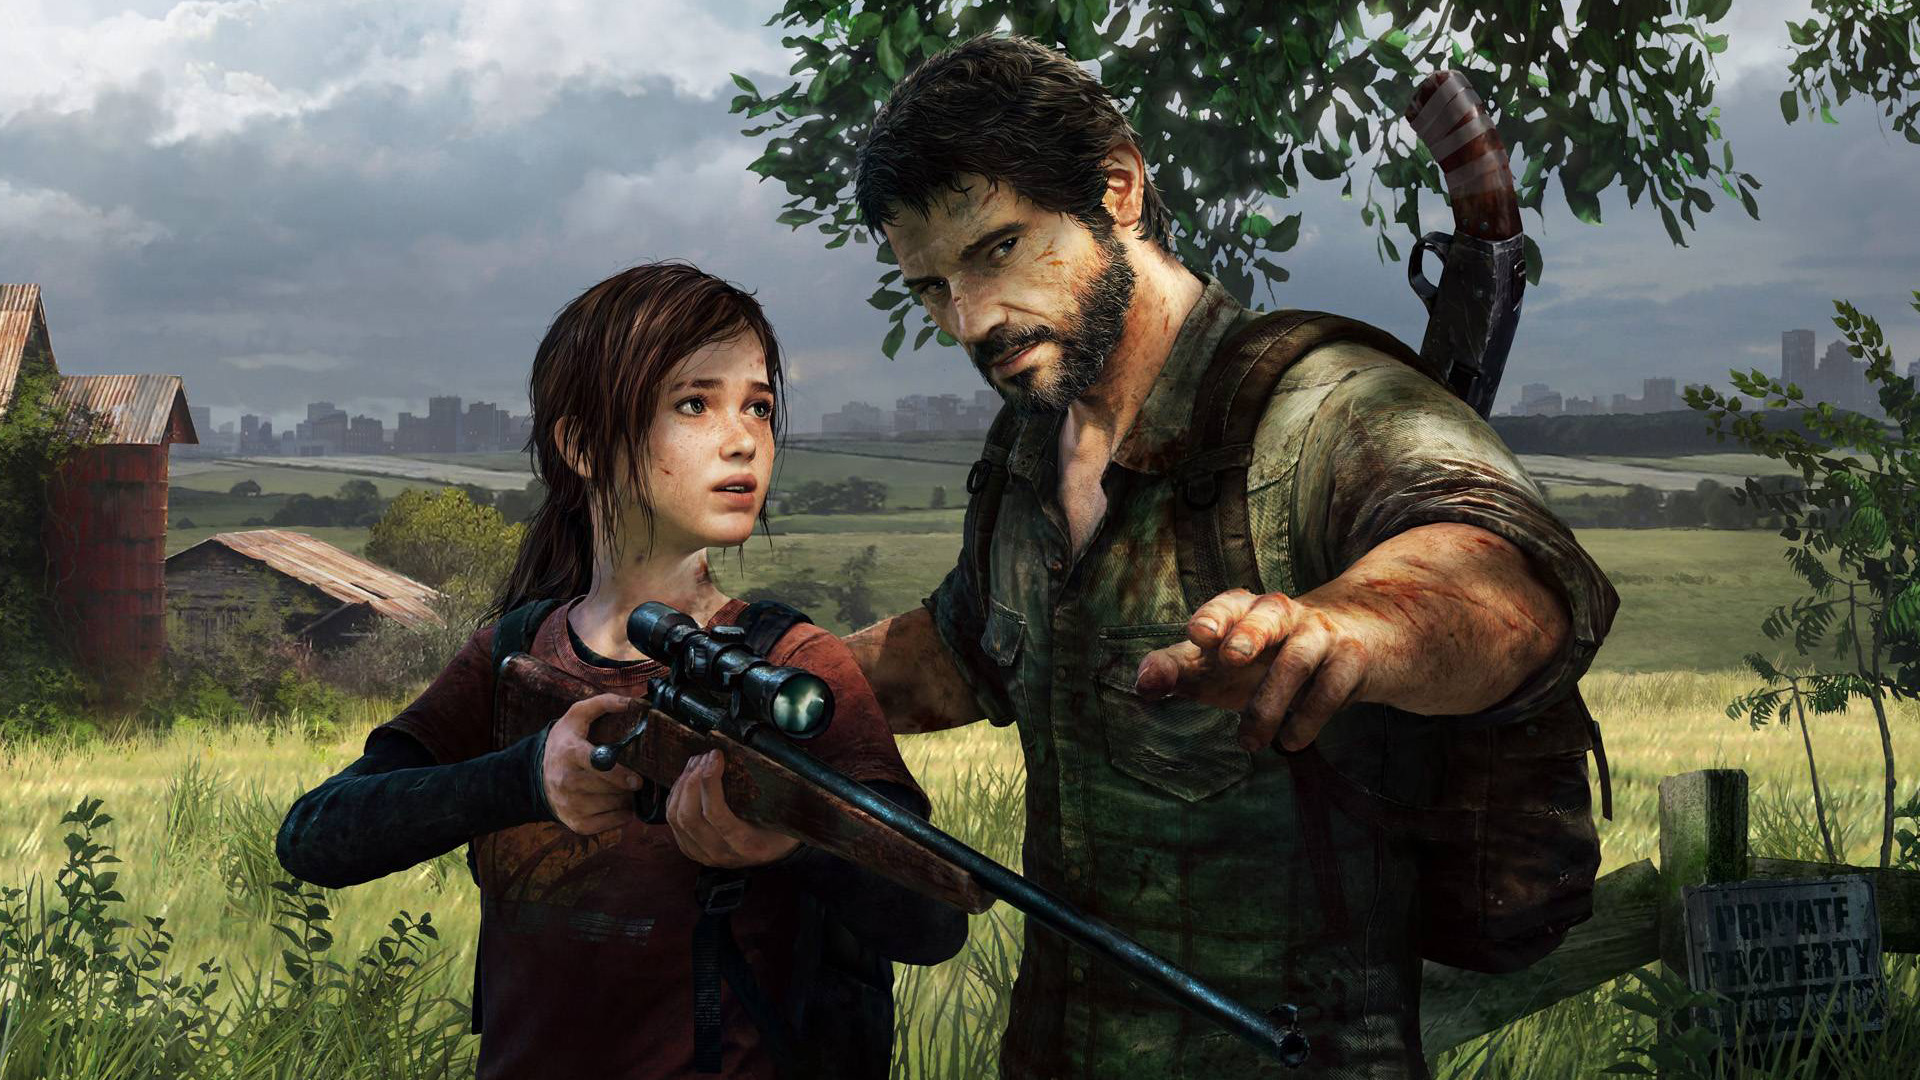 Joel teaches Ellie how to use a sniper rifle in The Last of Us